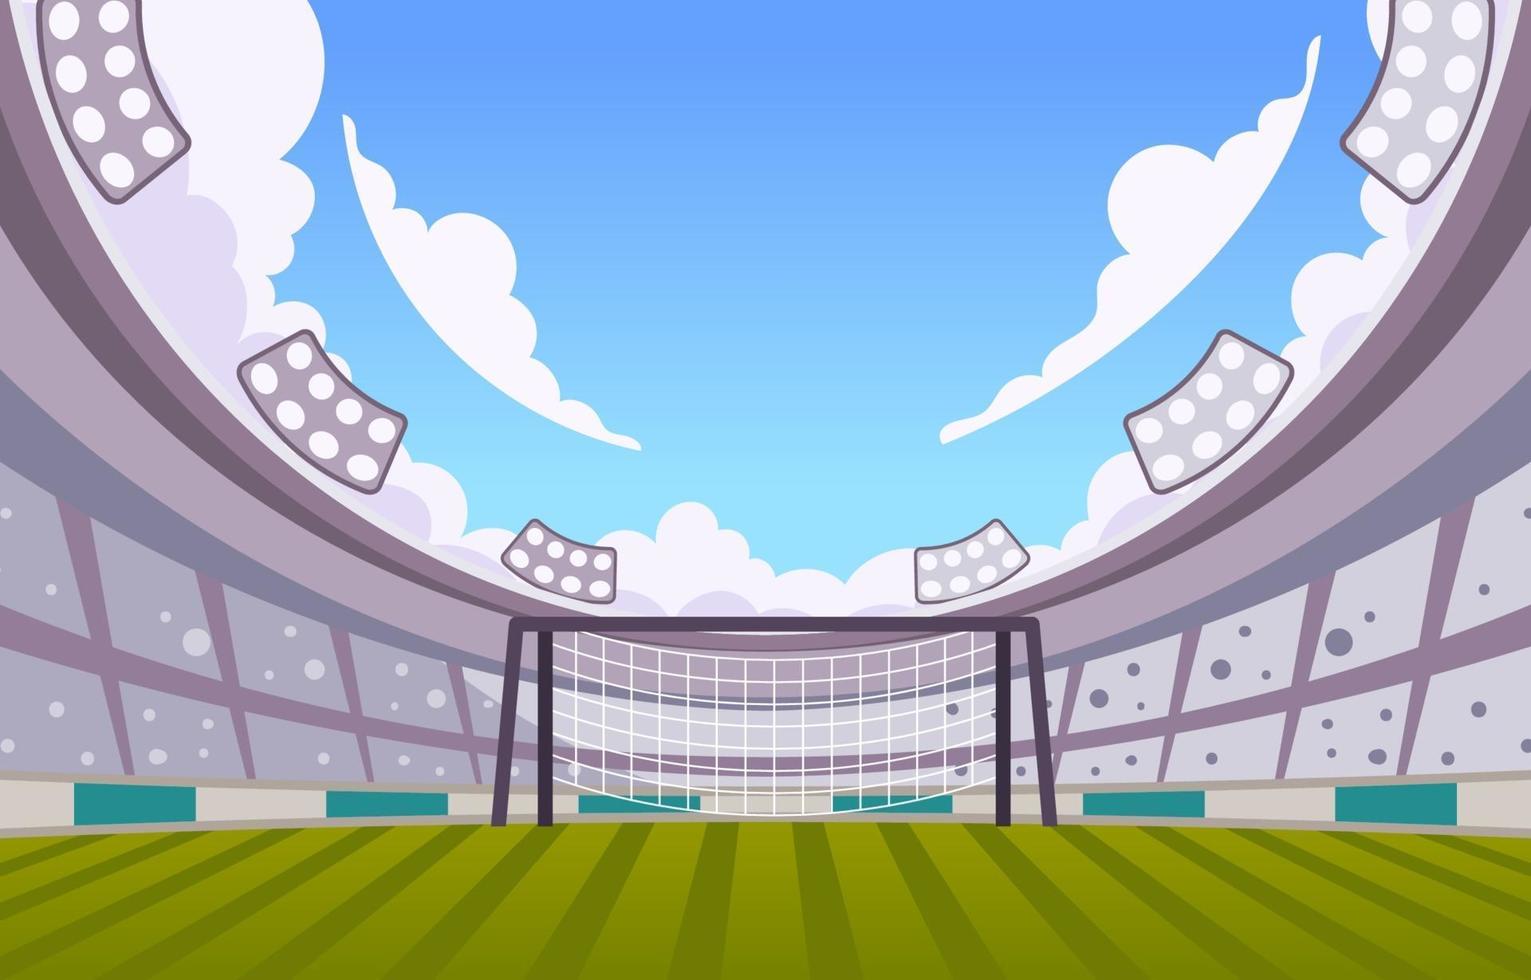 Fish Eye View of a Football Stadium Background vector